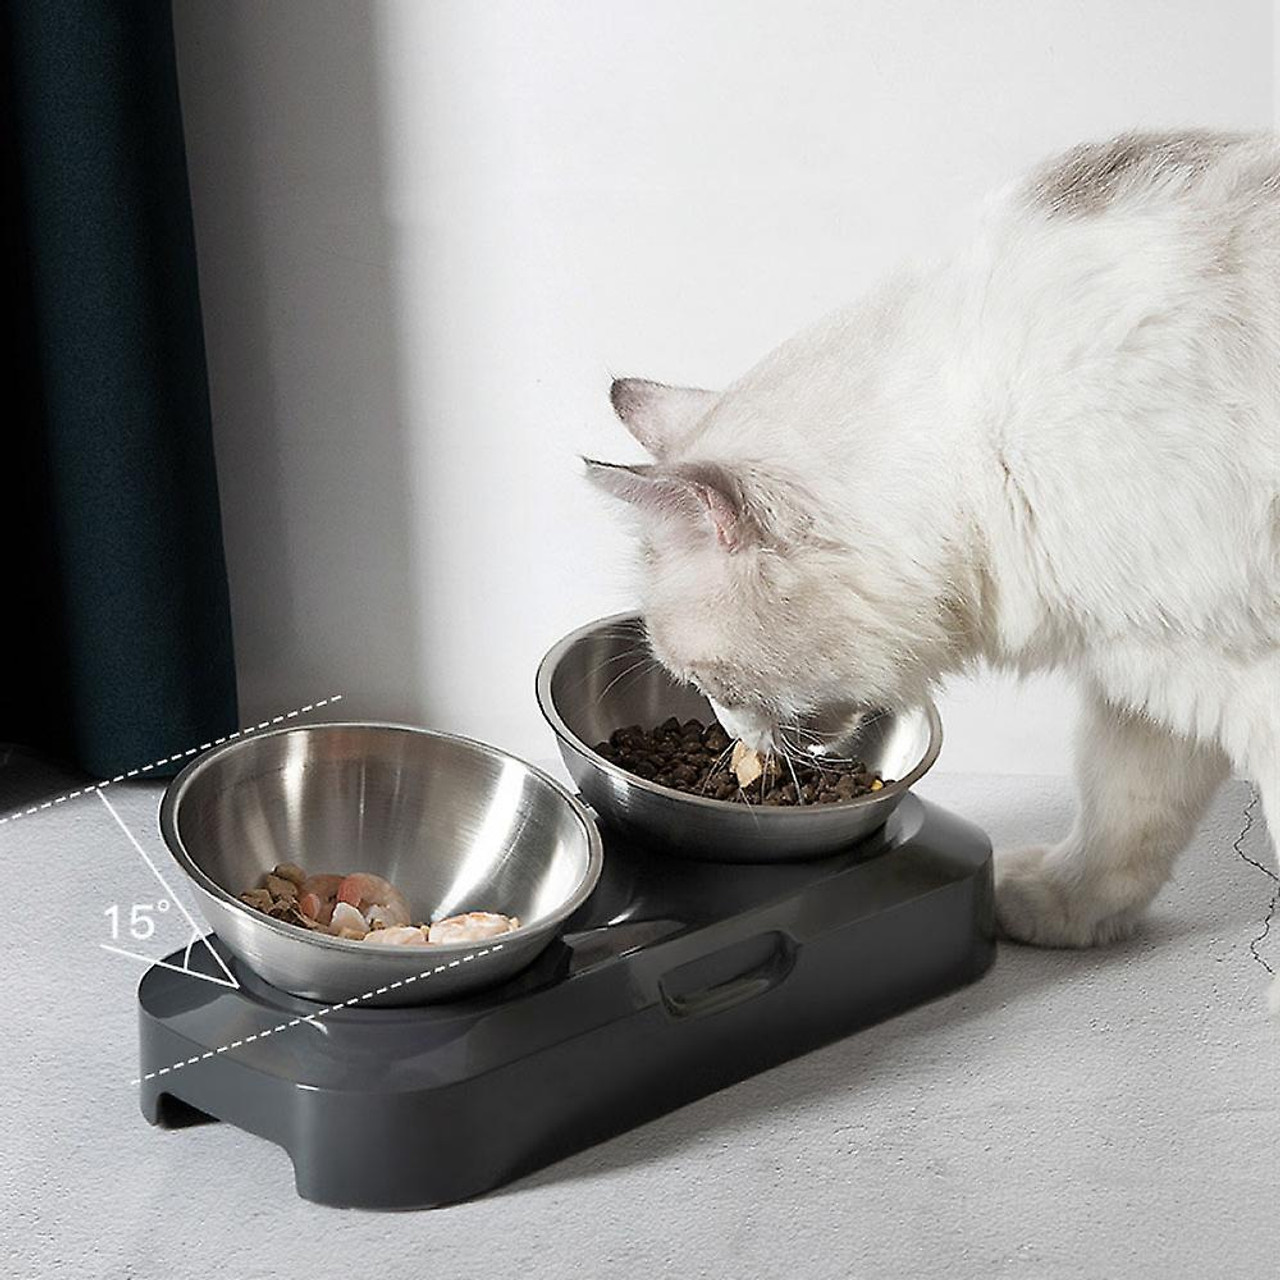 Bowl - Stainless Steel Double - The Proud Pet Store